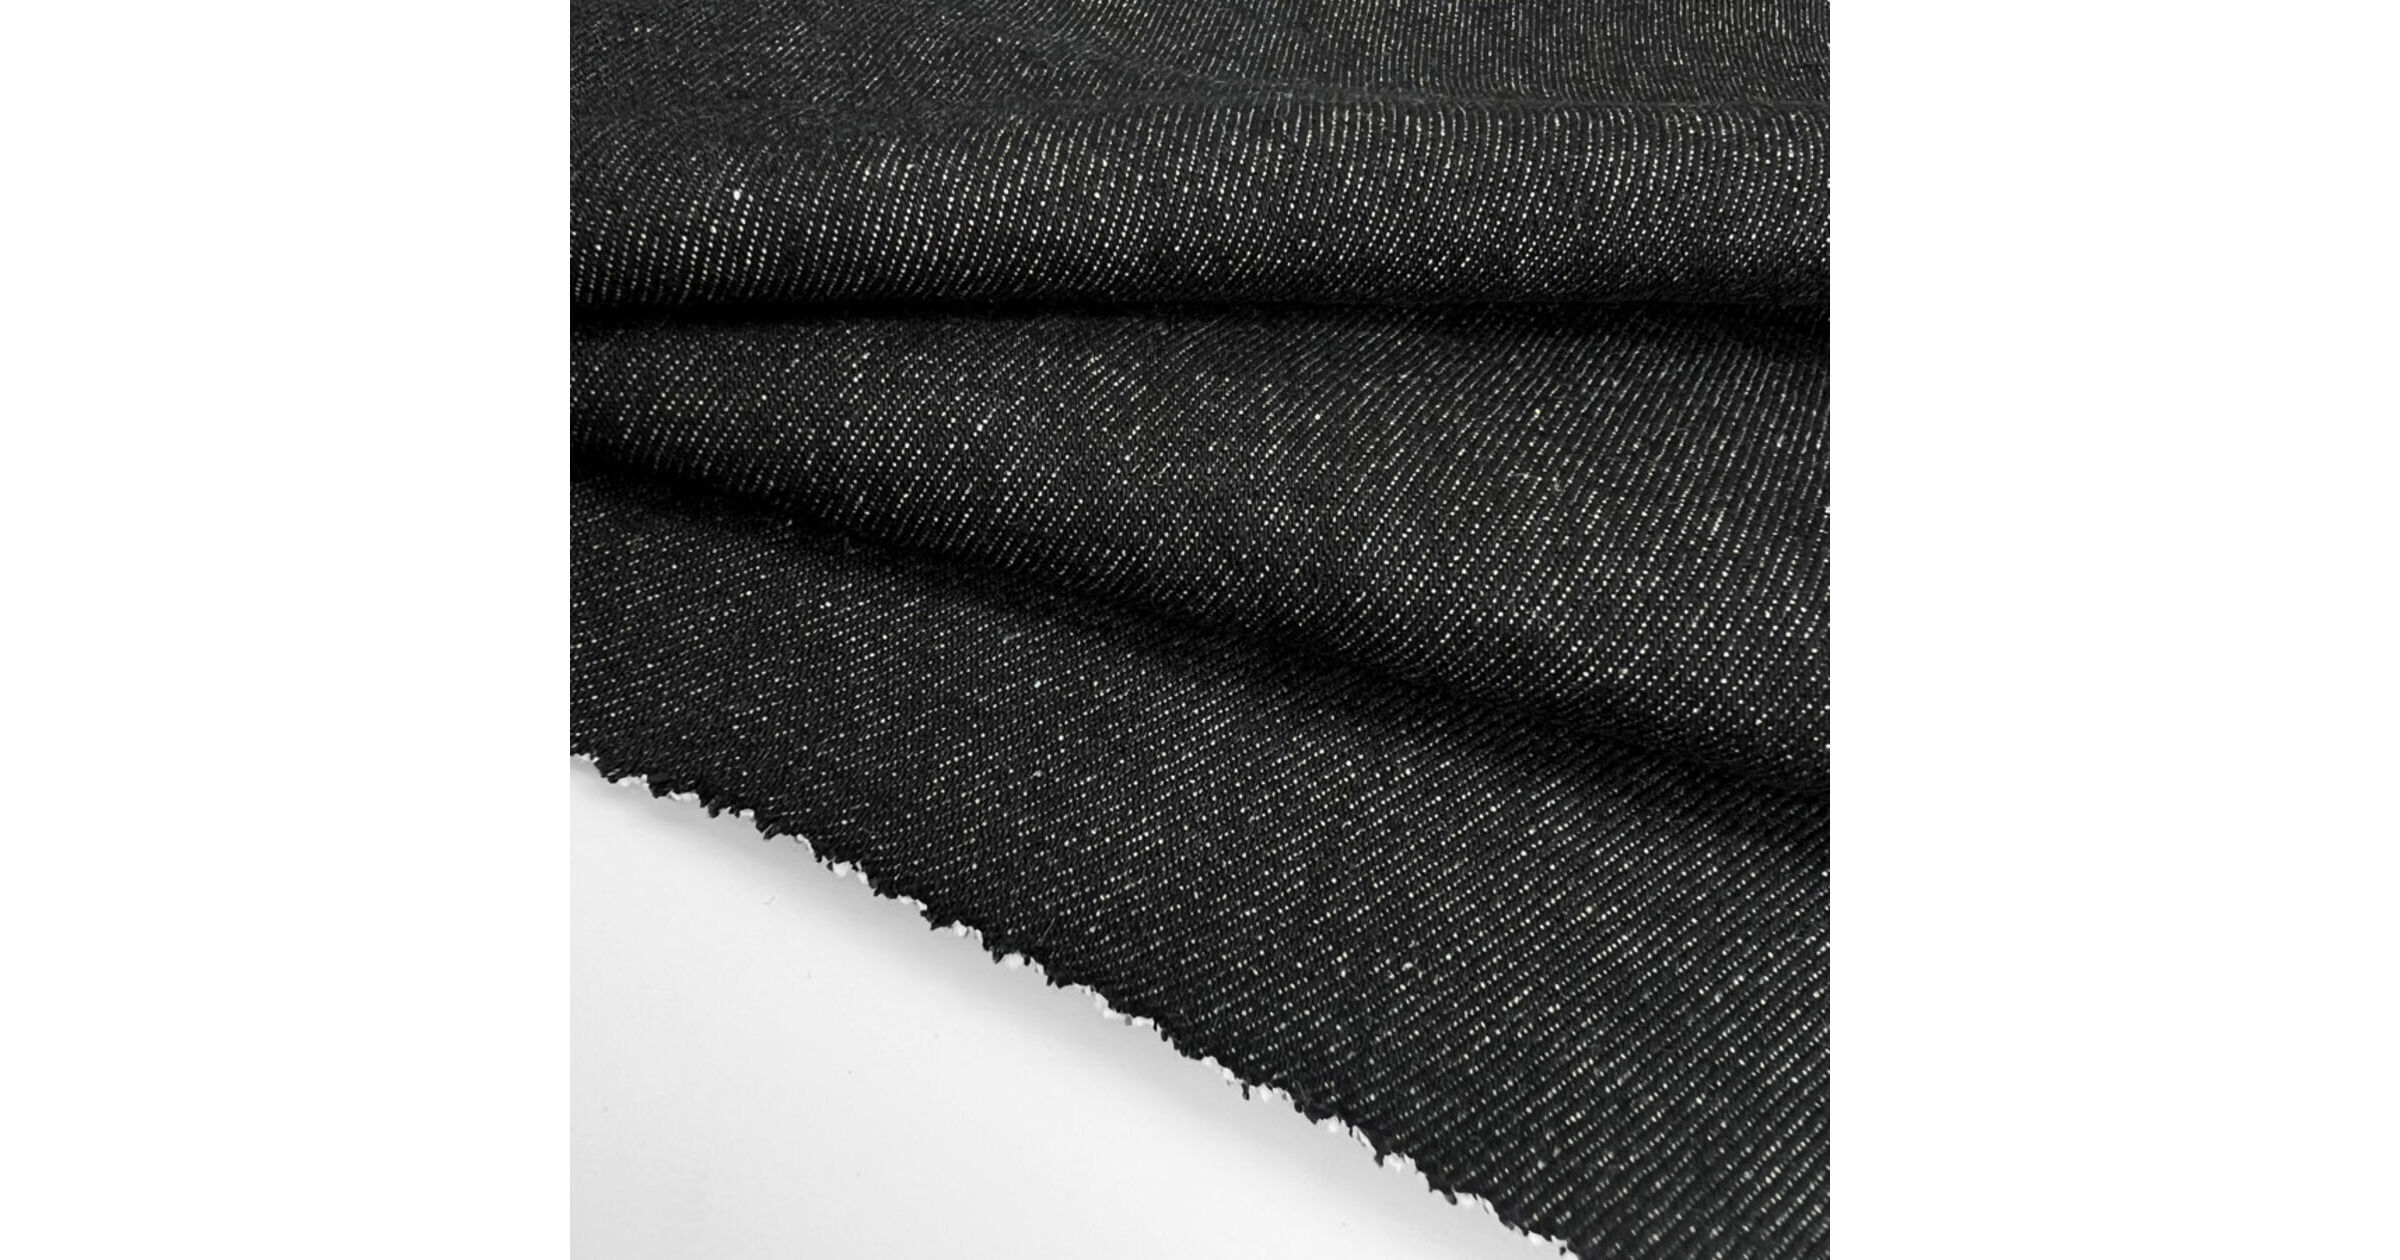 Durable 100% Cotton Midweight Twill Fabric